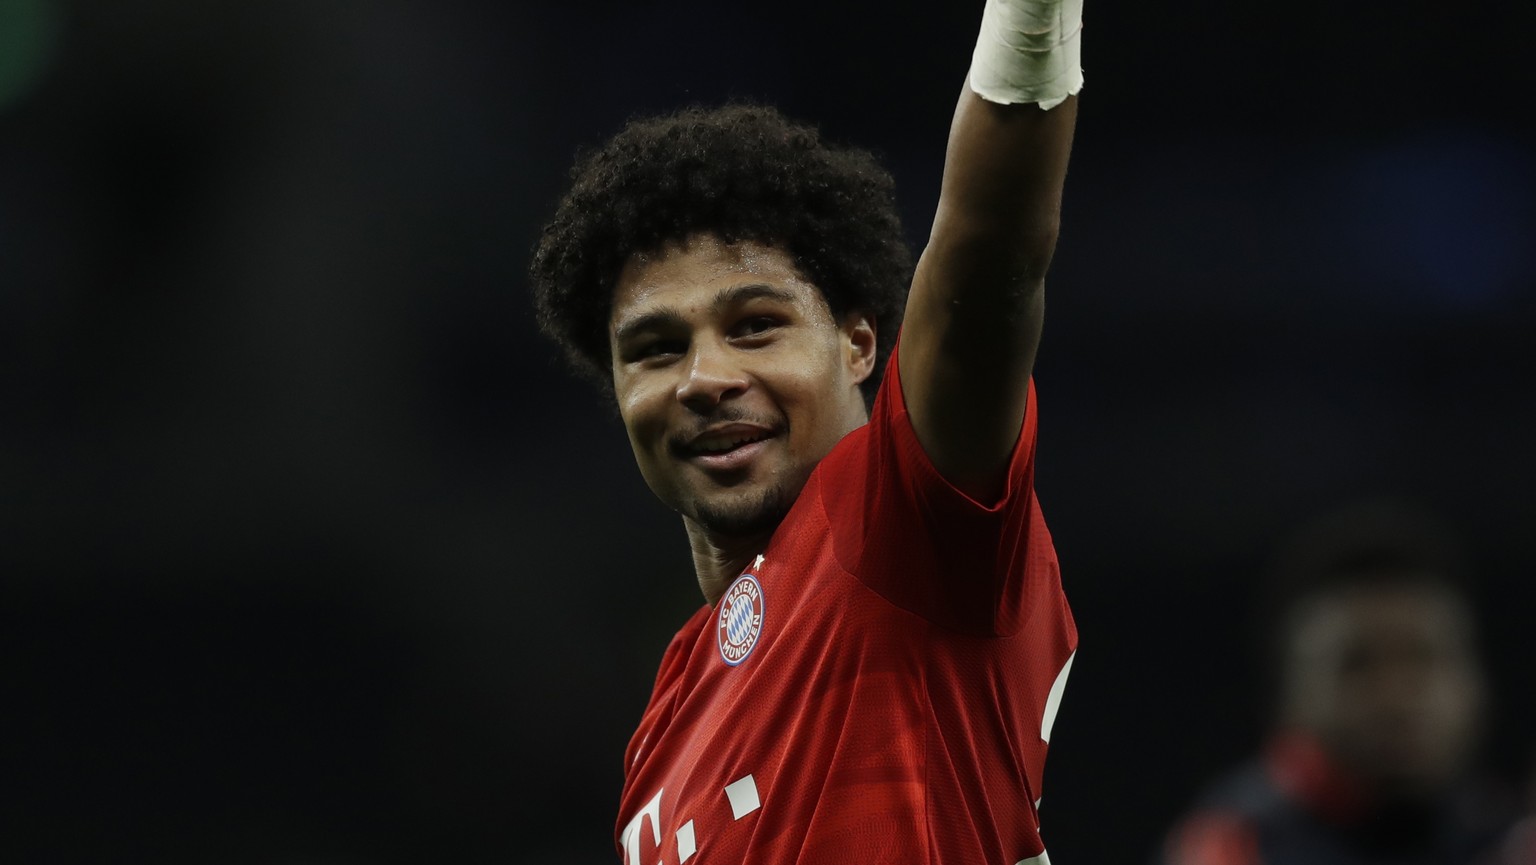 Bayern&#039;s Serge Gnabry, scorer of four goals, celebrates after the Champions League group B soccer match between Tottenham and Bayern Munich at the Tottenham Hotspur stadium in London, Tuesday, Oc ...